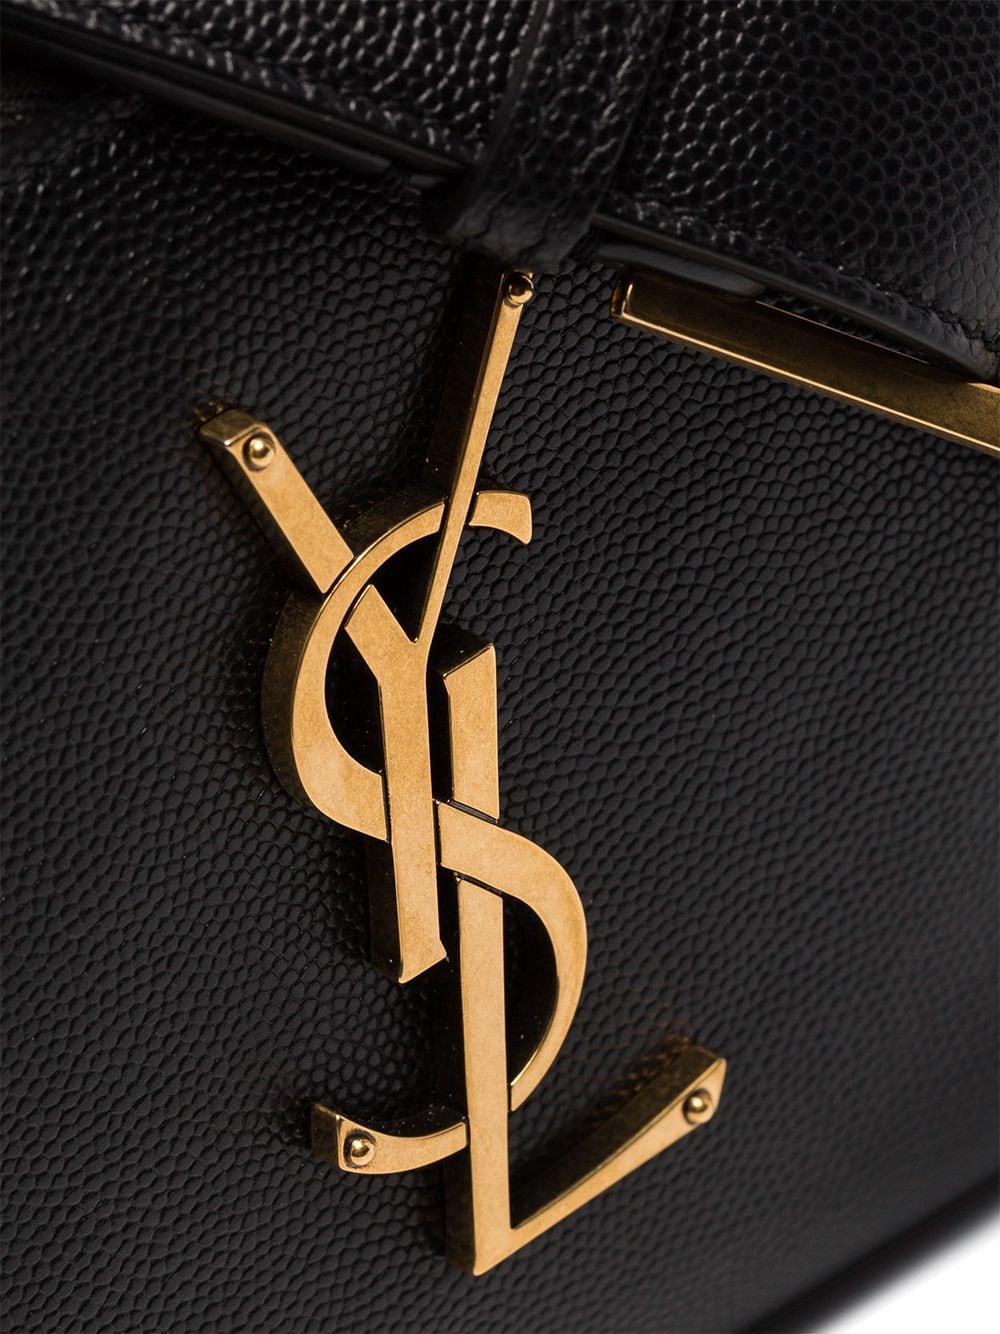 YSL MONOGRAM BELT UNBOXING AND FARFETCH DISCOUNT CODE